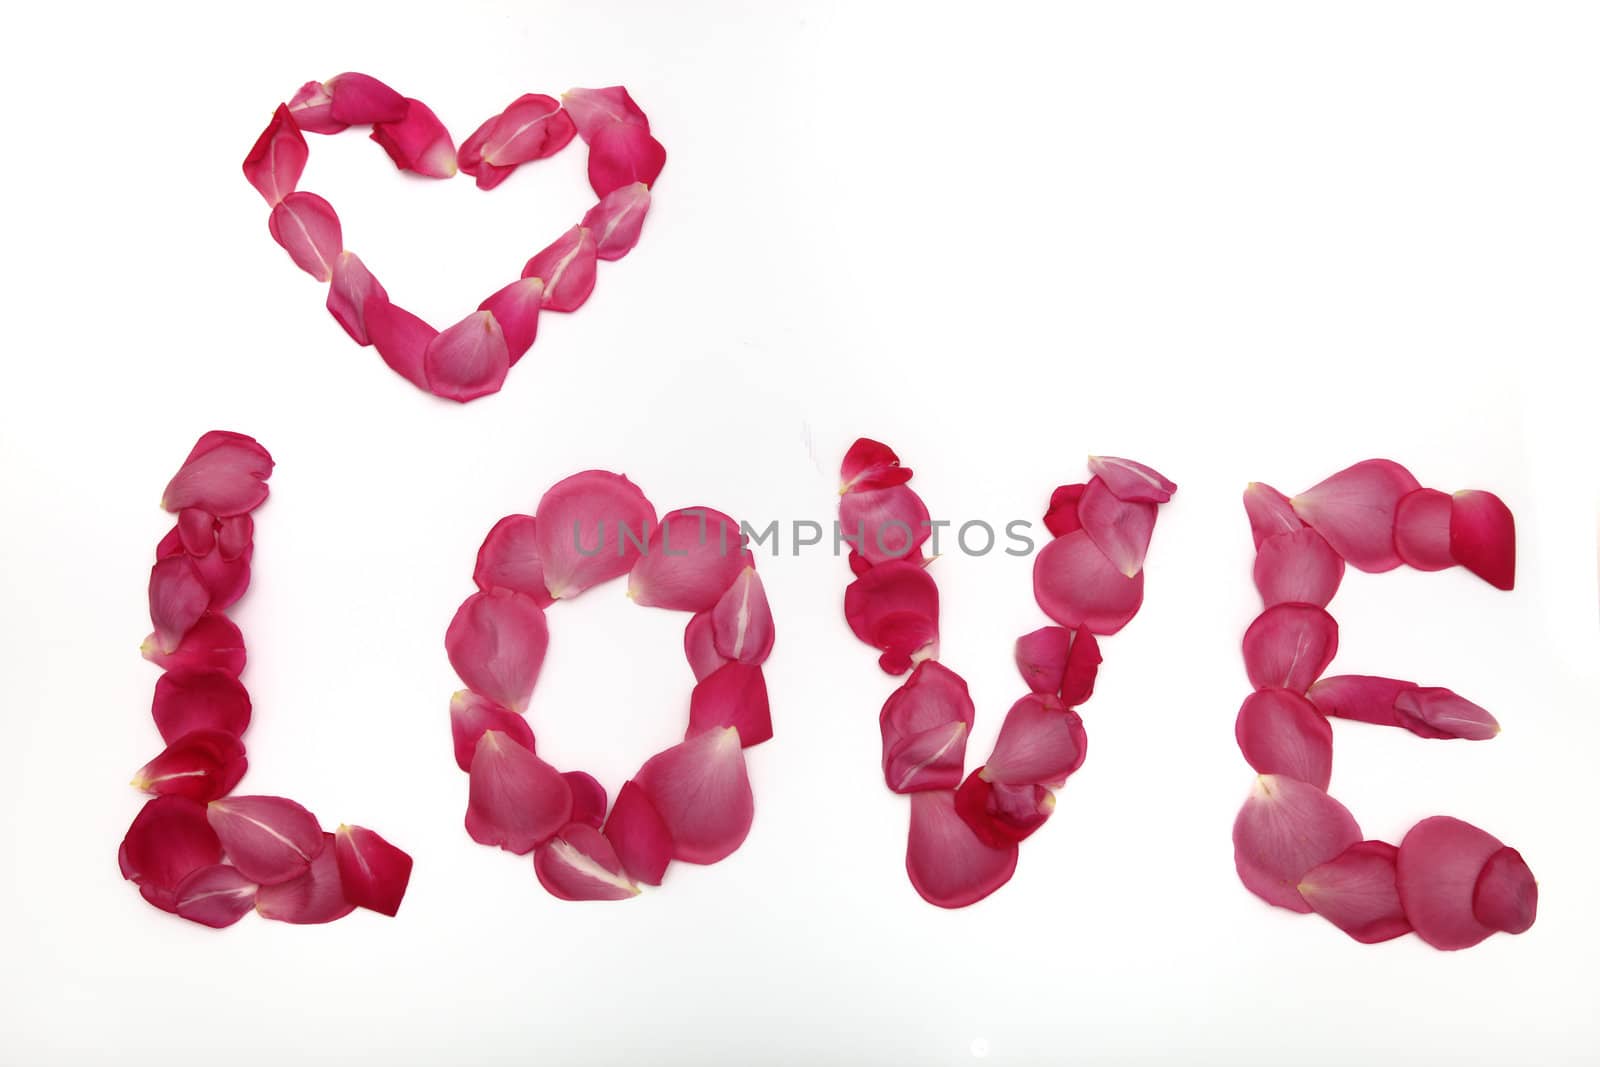 Word "Love" made ??of rose petals by Farina6000